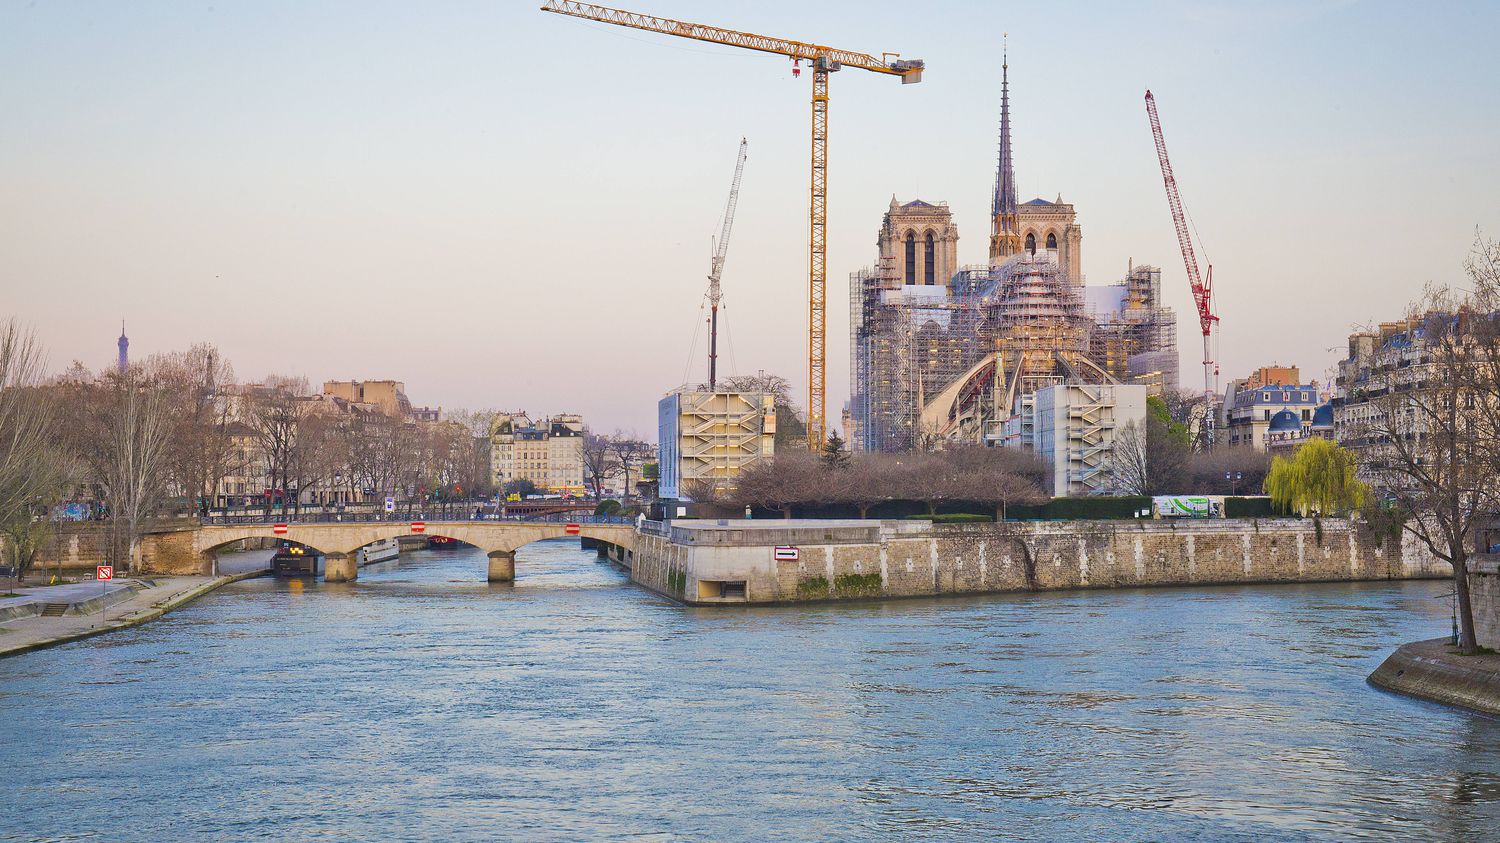 Notre-Dame de Paris: "We adhere to the deadlines and the budget", assures Philippe Jost, head of the reconstruction project